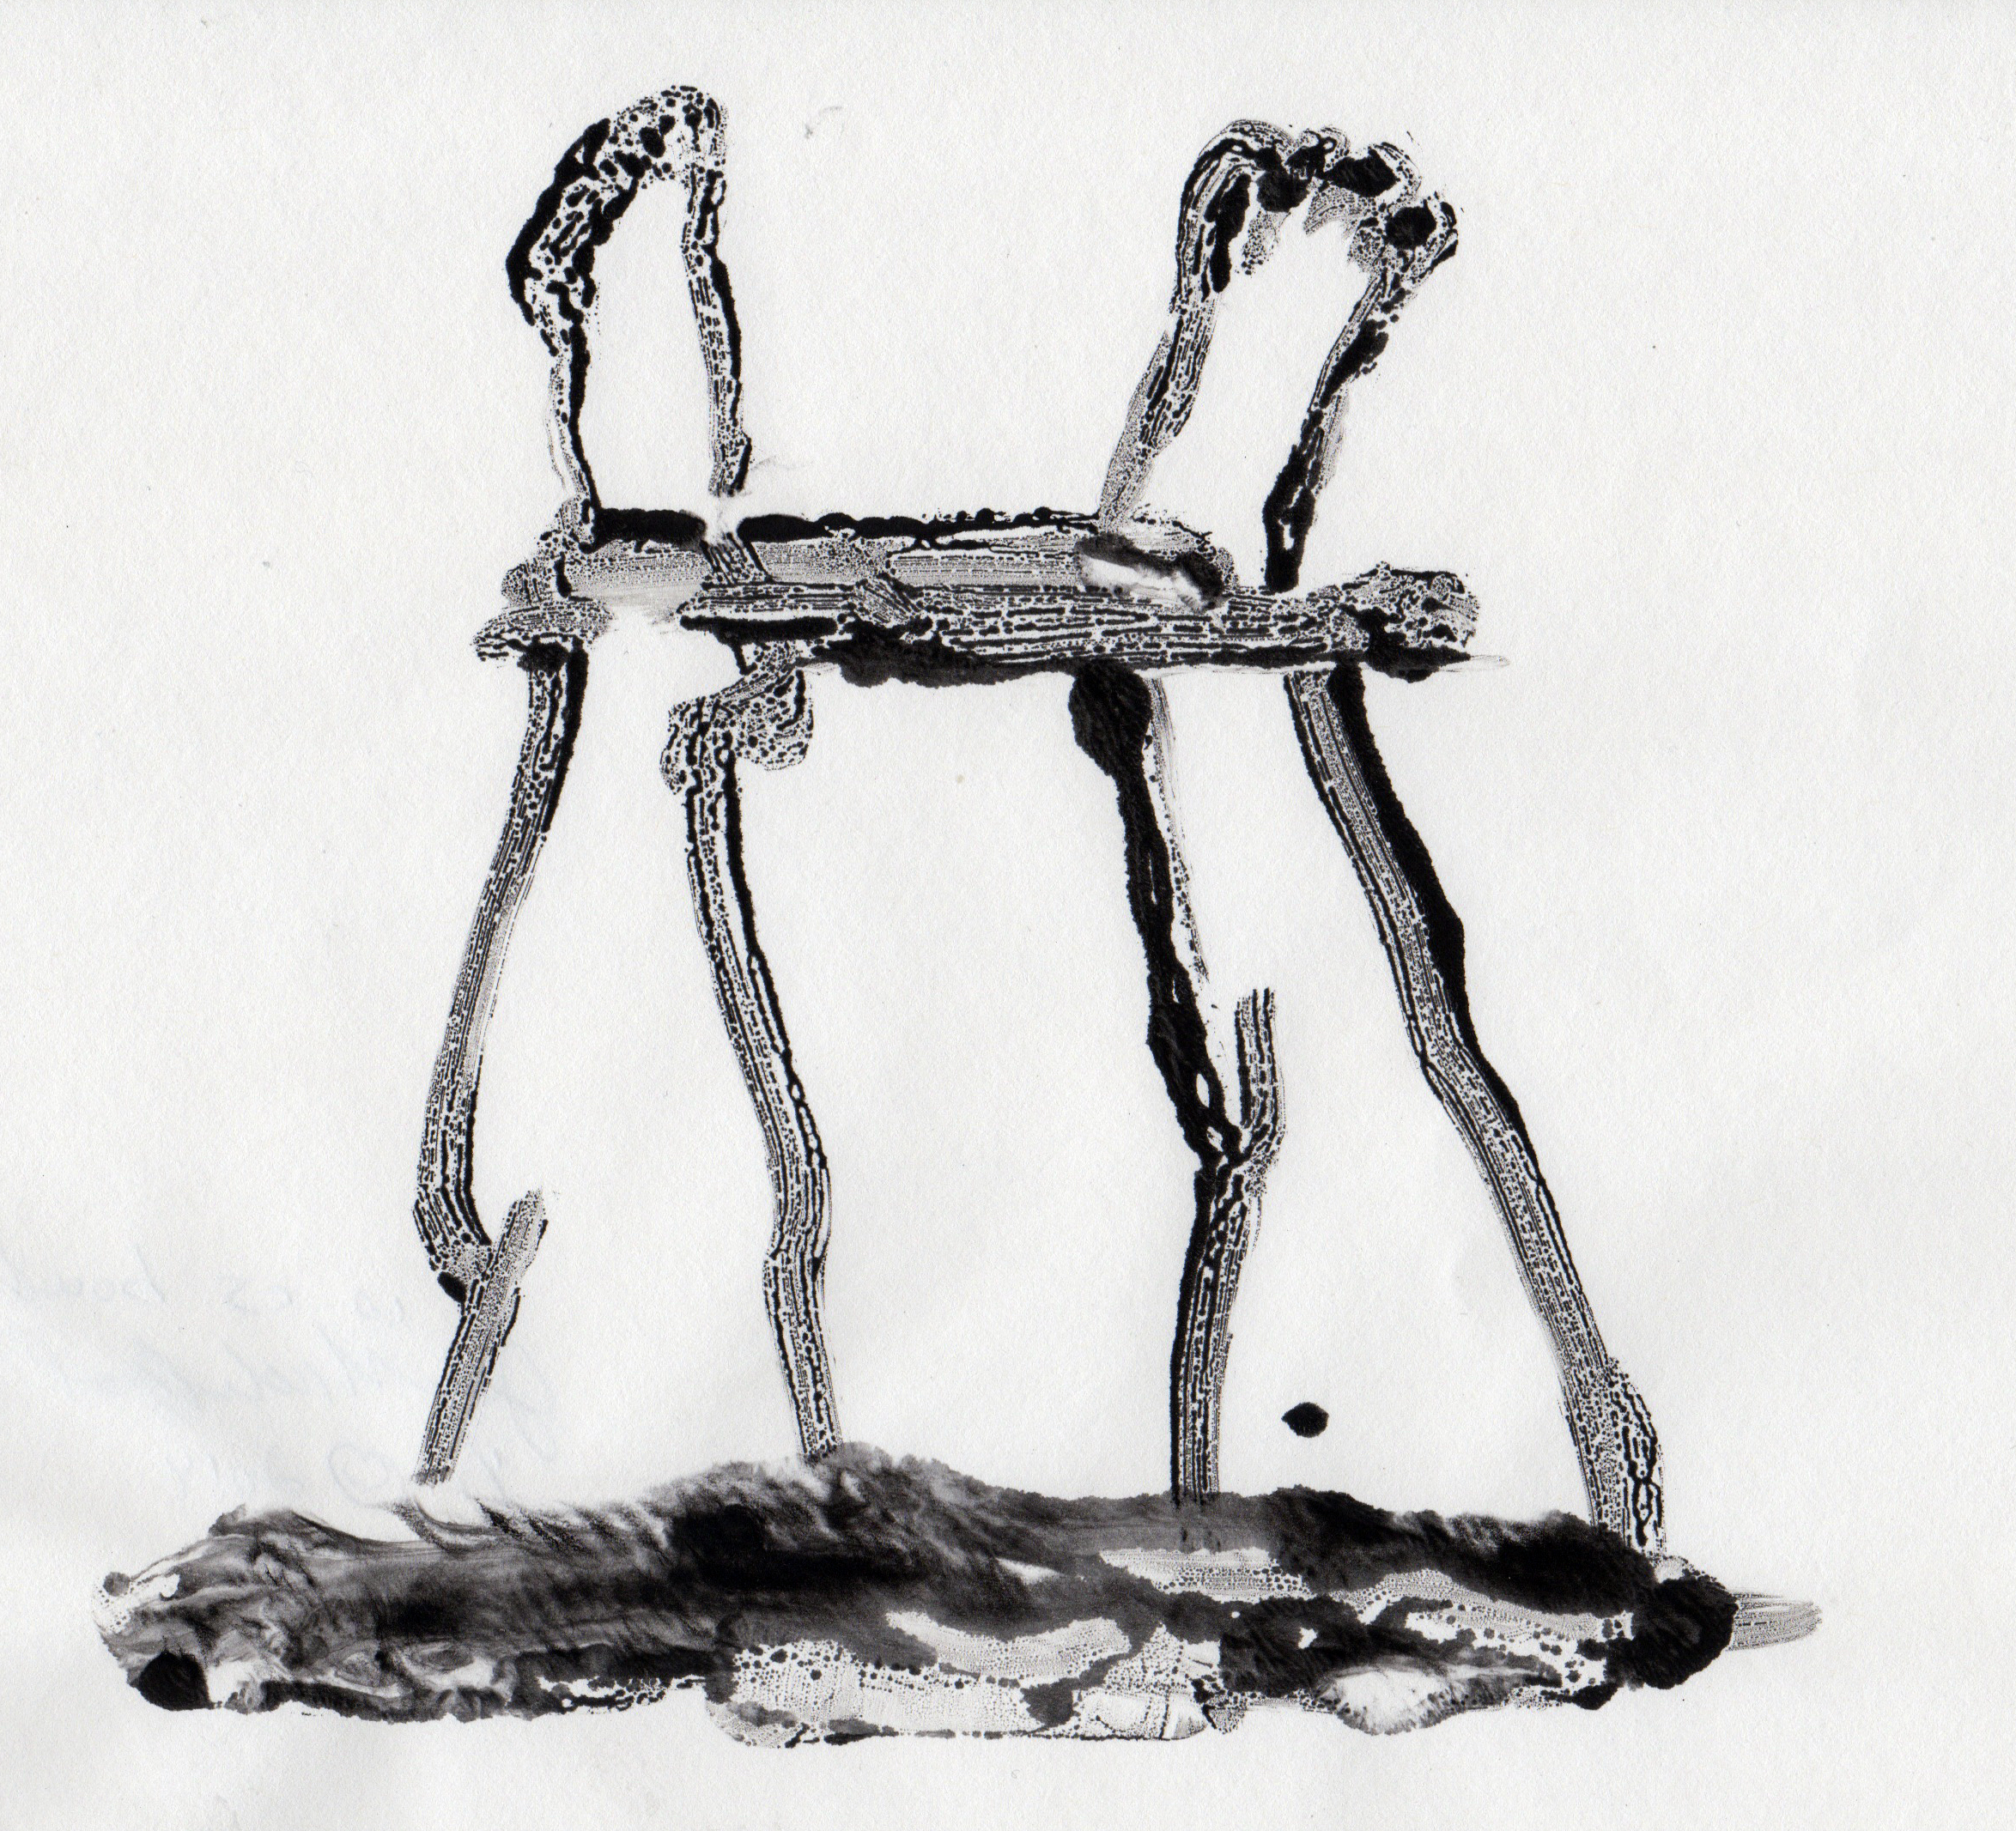 Is As Bound, 2014, gelatin monotype, 10x9 inches